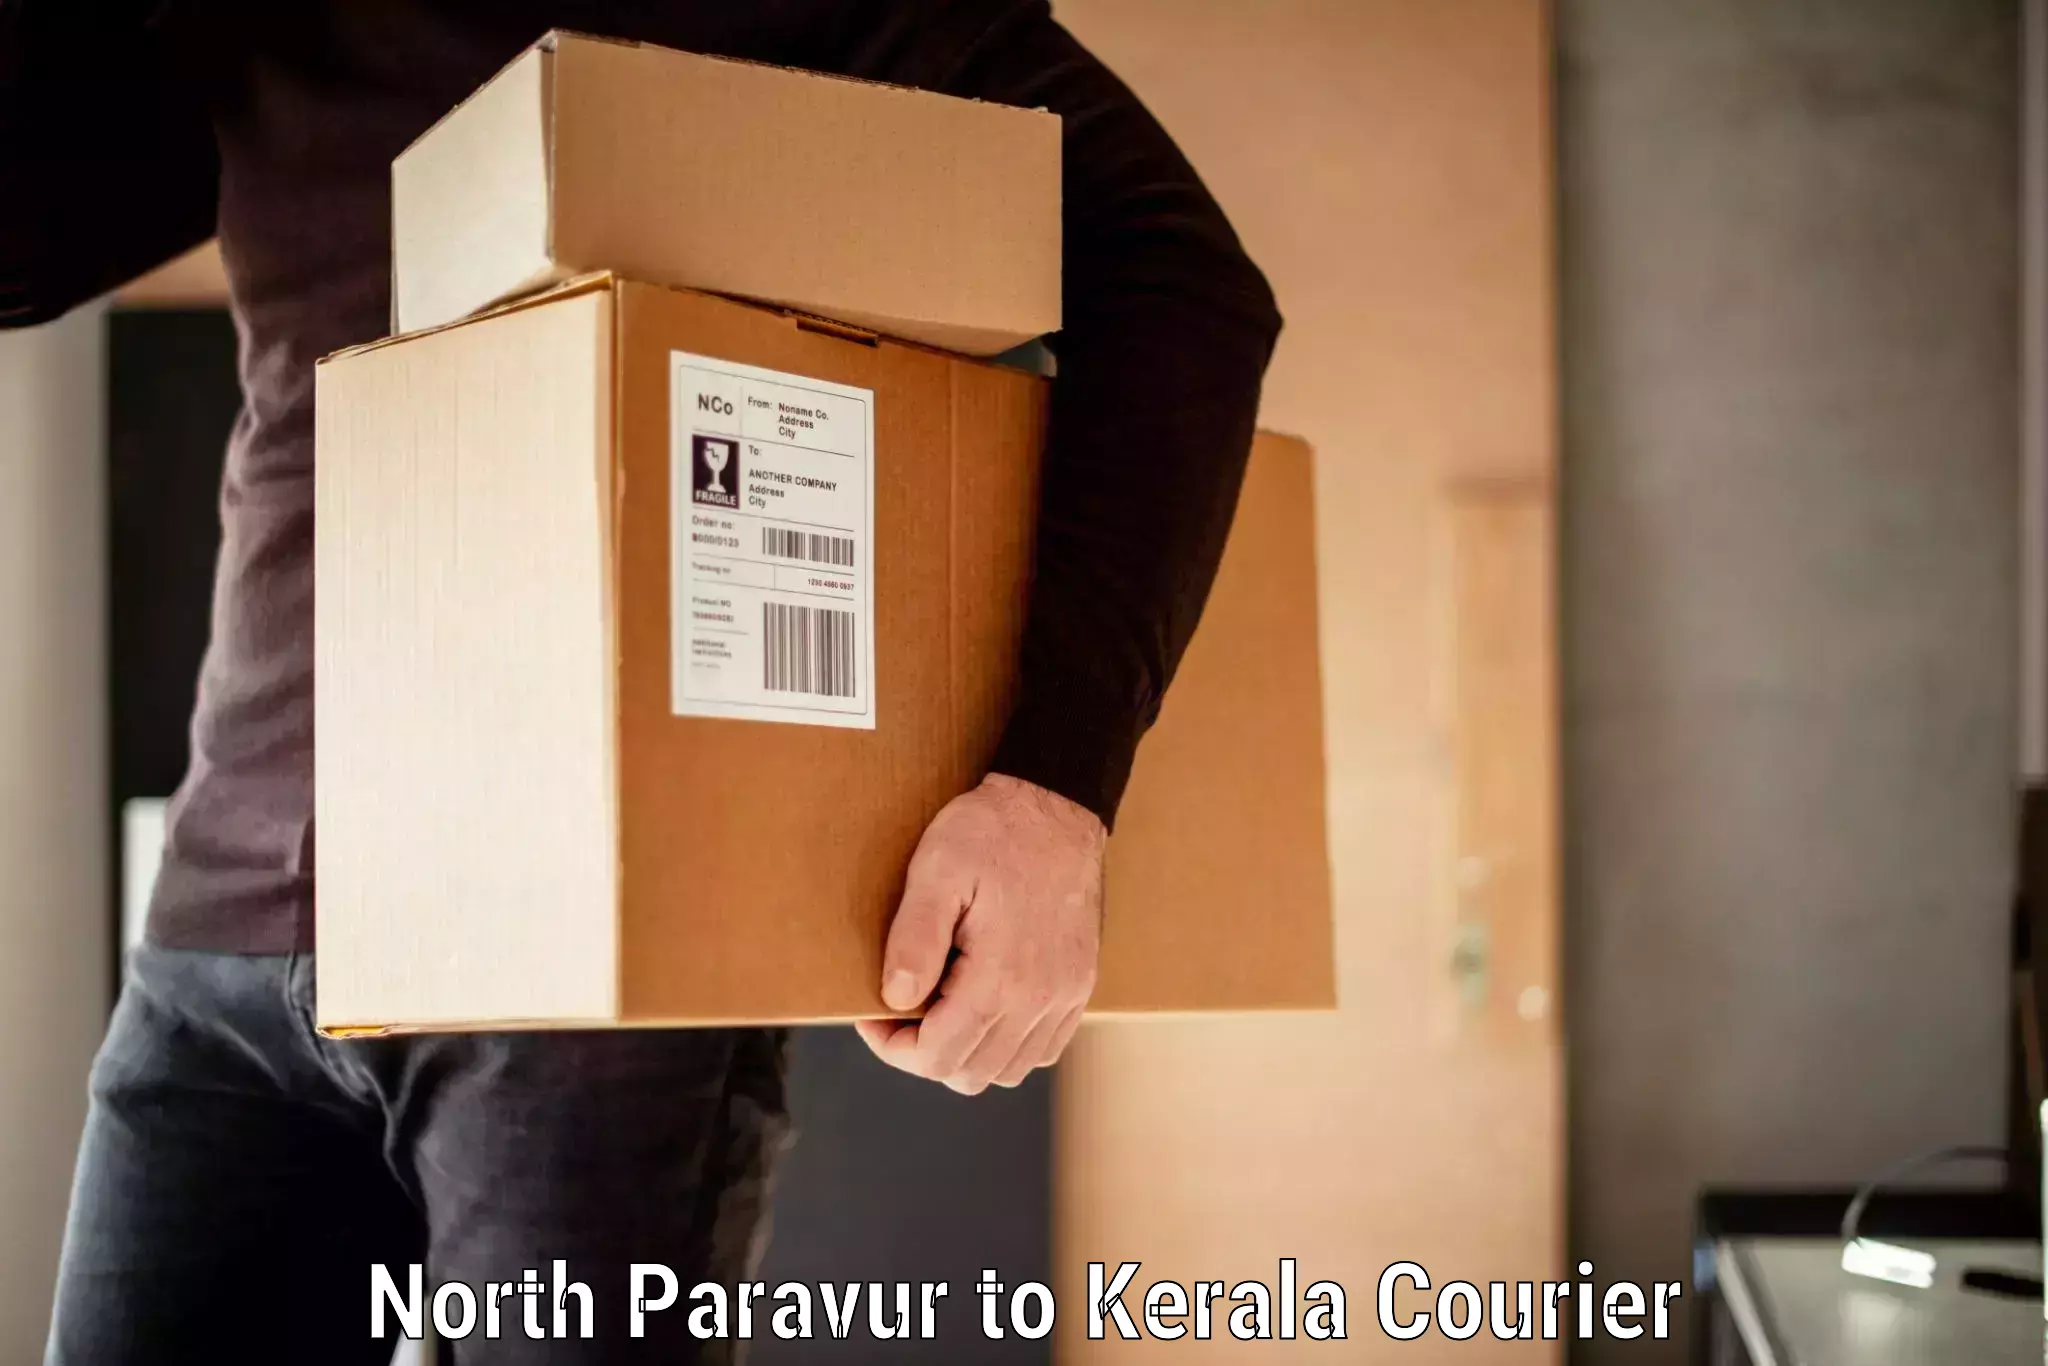 Personal effects shipping North Paravur to Cochin Port Kochi